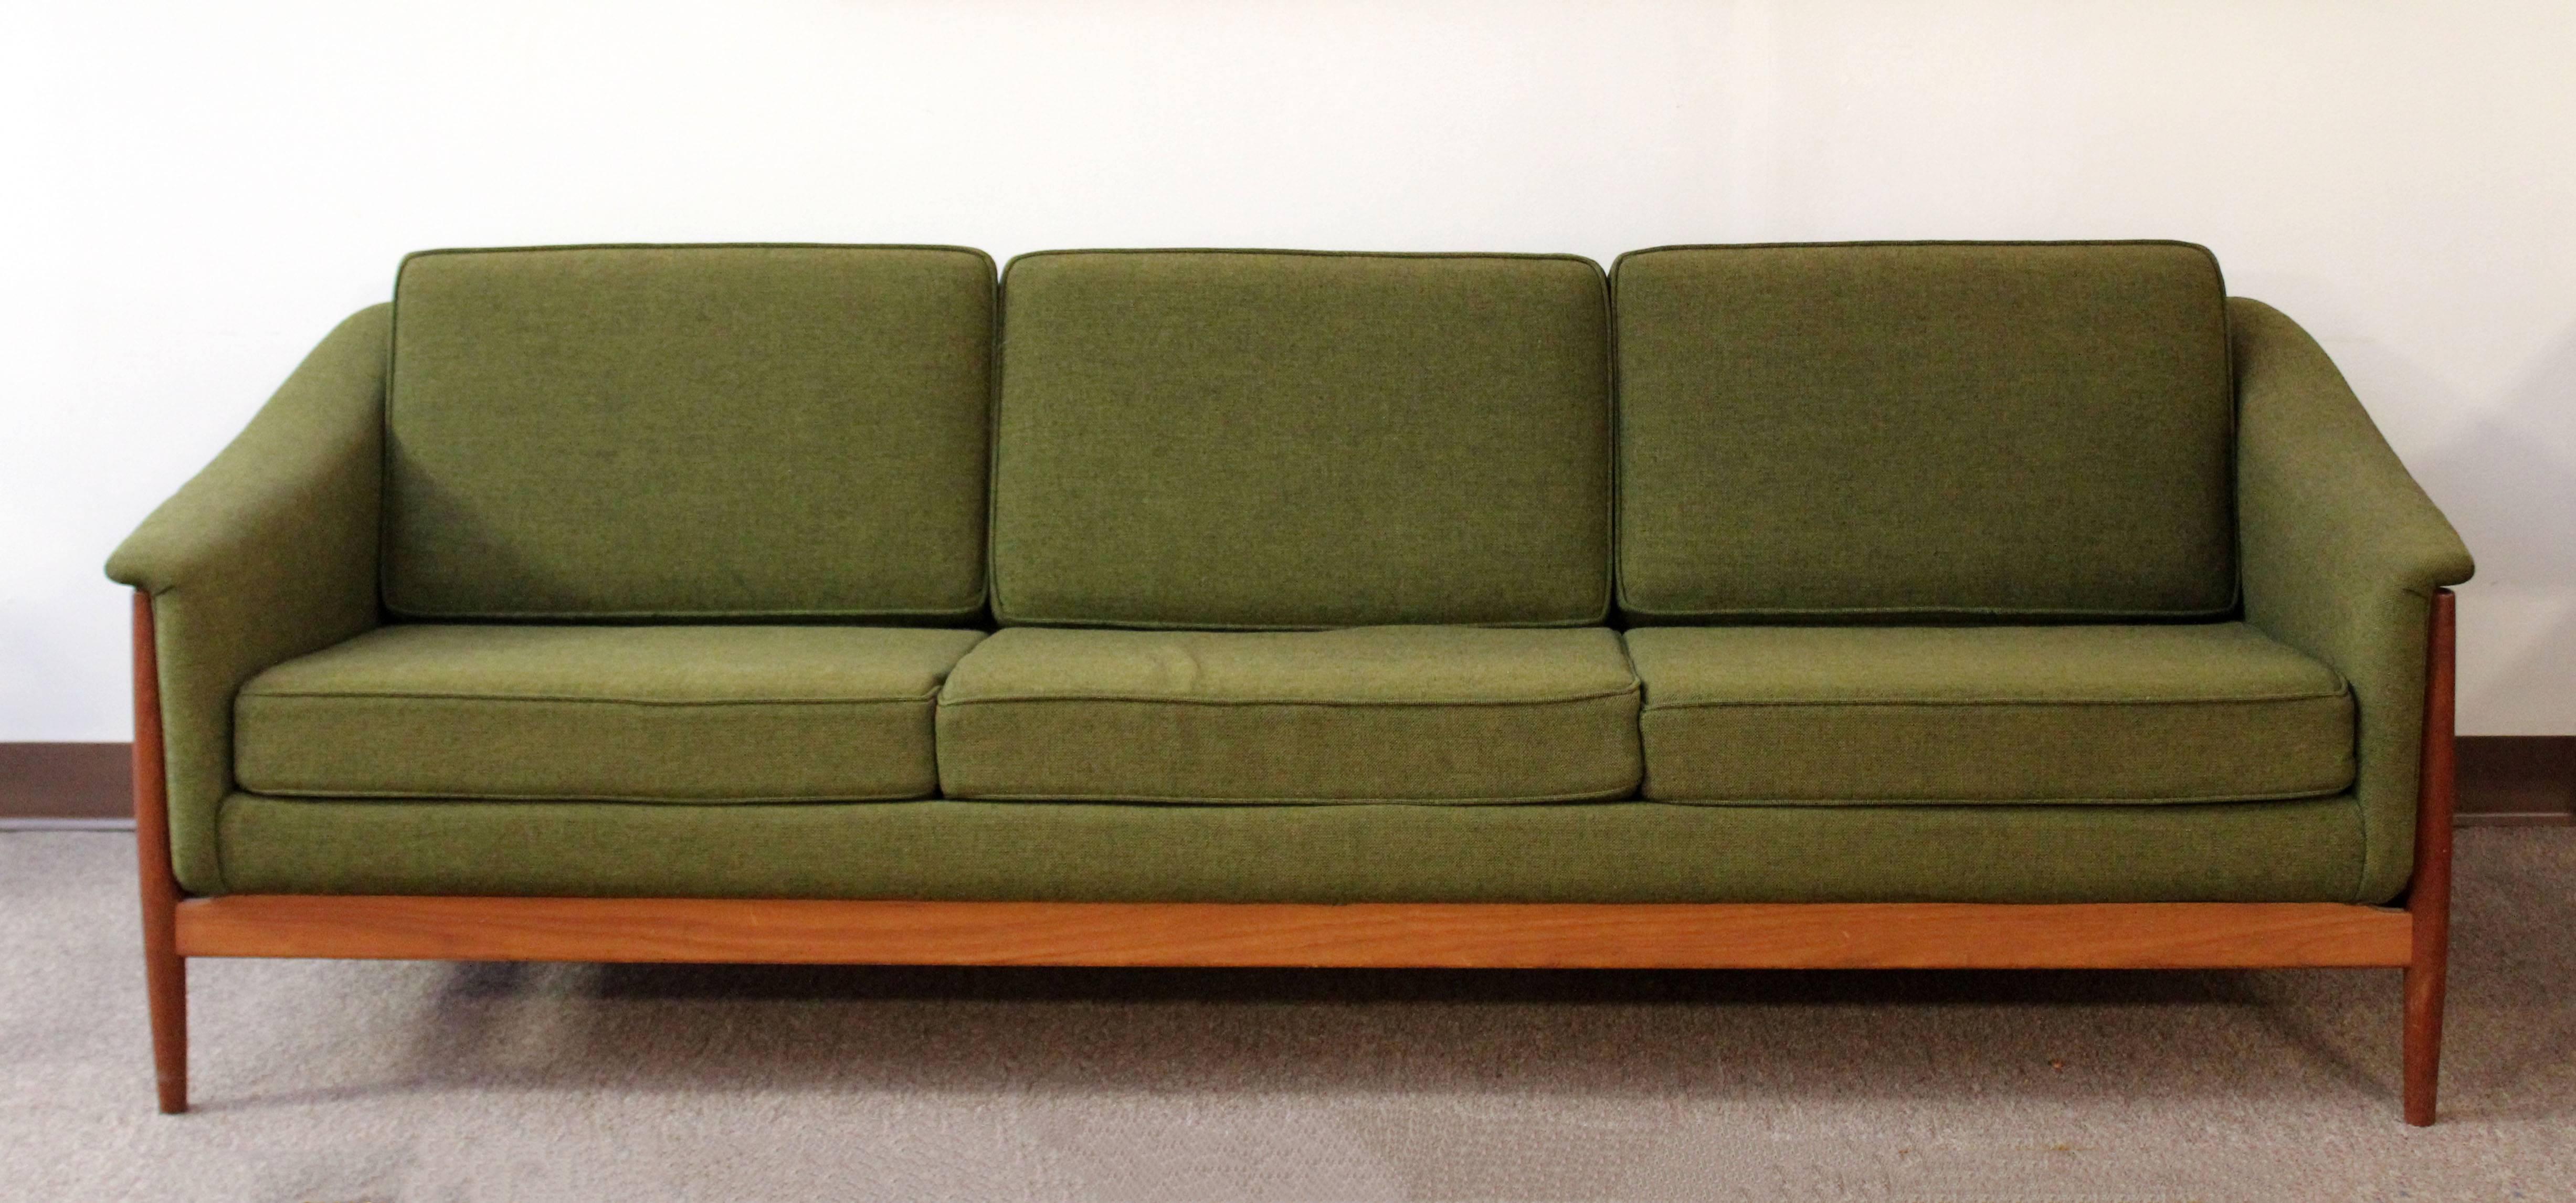 American Mid-Century Modern Three-Seat Curved Wood Sofa by Folke Ohlsson for DUX Sweden